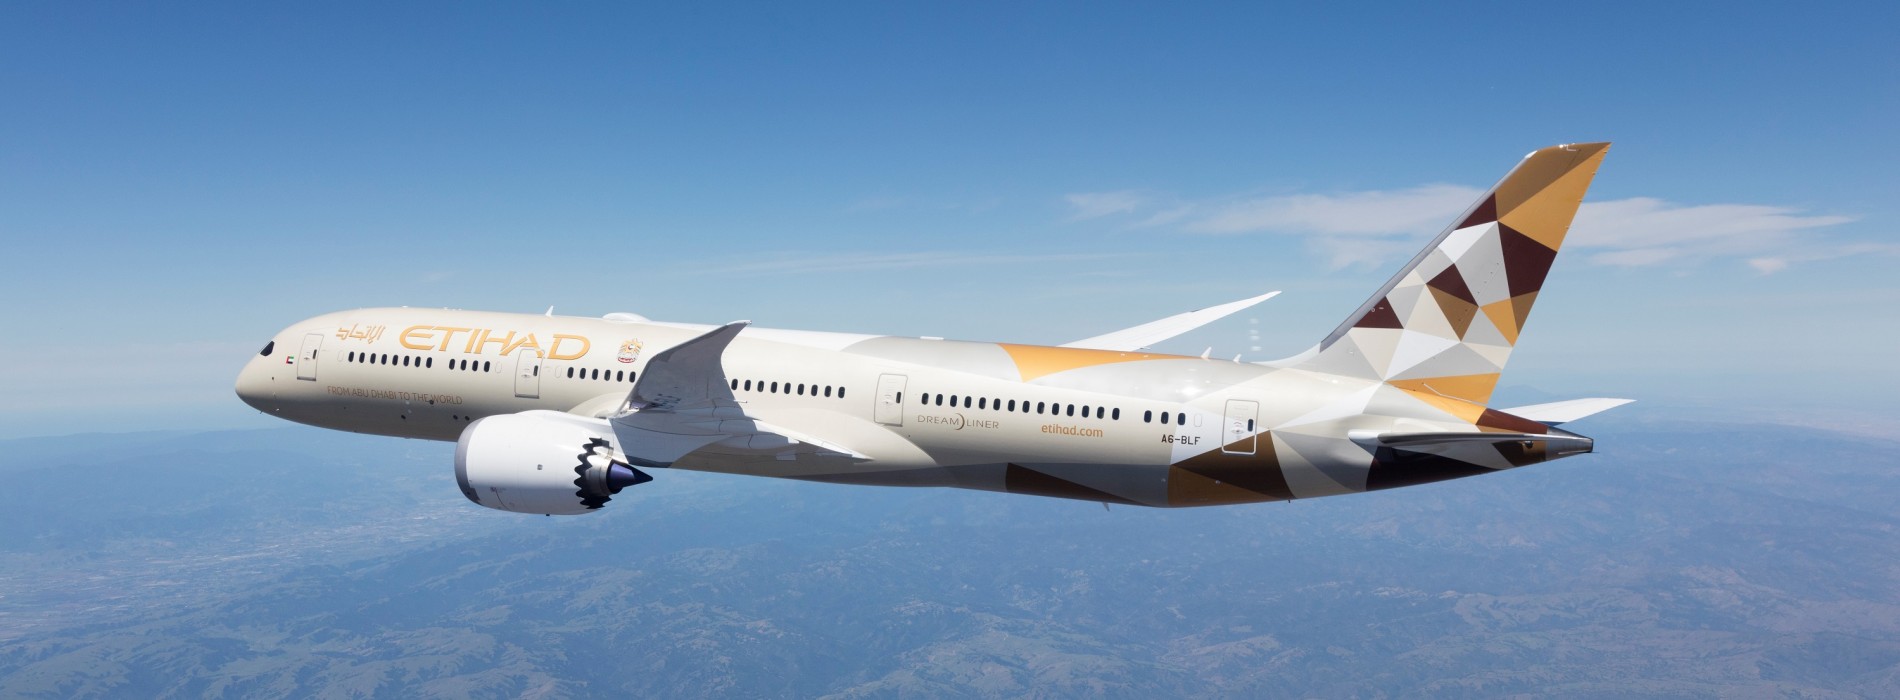 ETIHAD AIRWAYS TO RESUME SPECIAL PASSENGER SERVICES TO AND FROM ABU DHABI TO SIX DESTINATIONS IN INDIA   